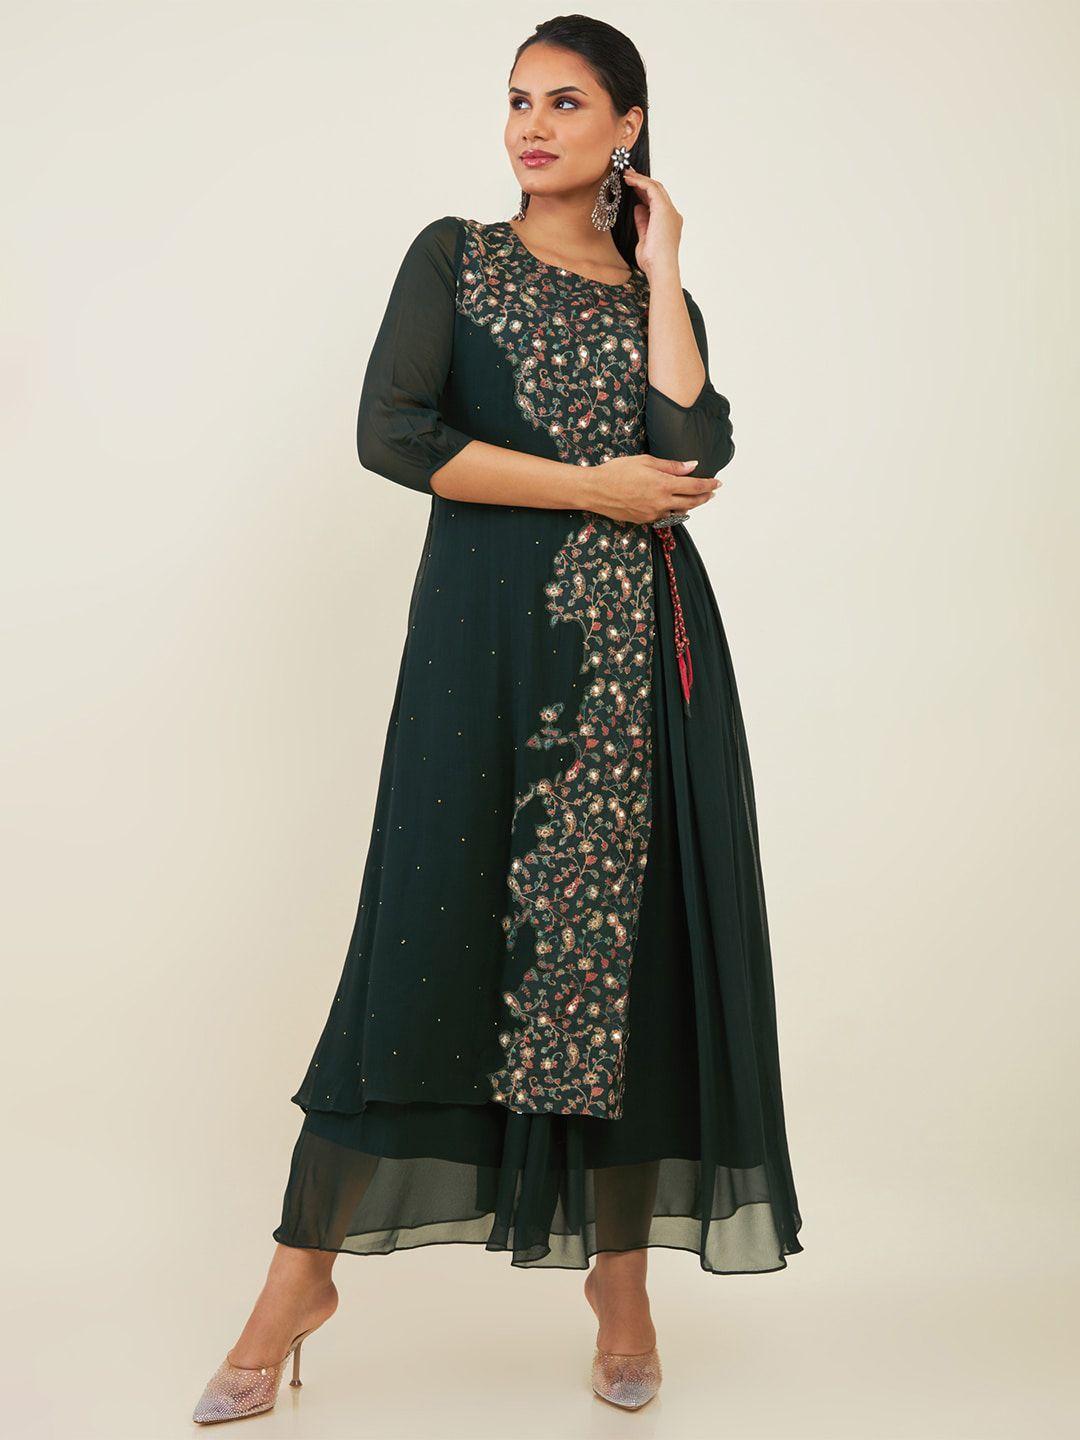 soch-round-neck-ethnic-motifs-embroidered-georgette-fit-and-flare-ethnic-dress